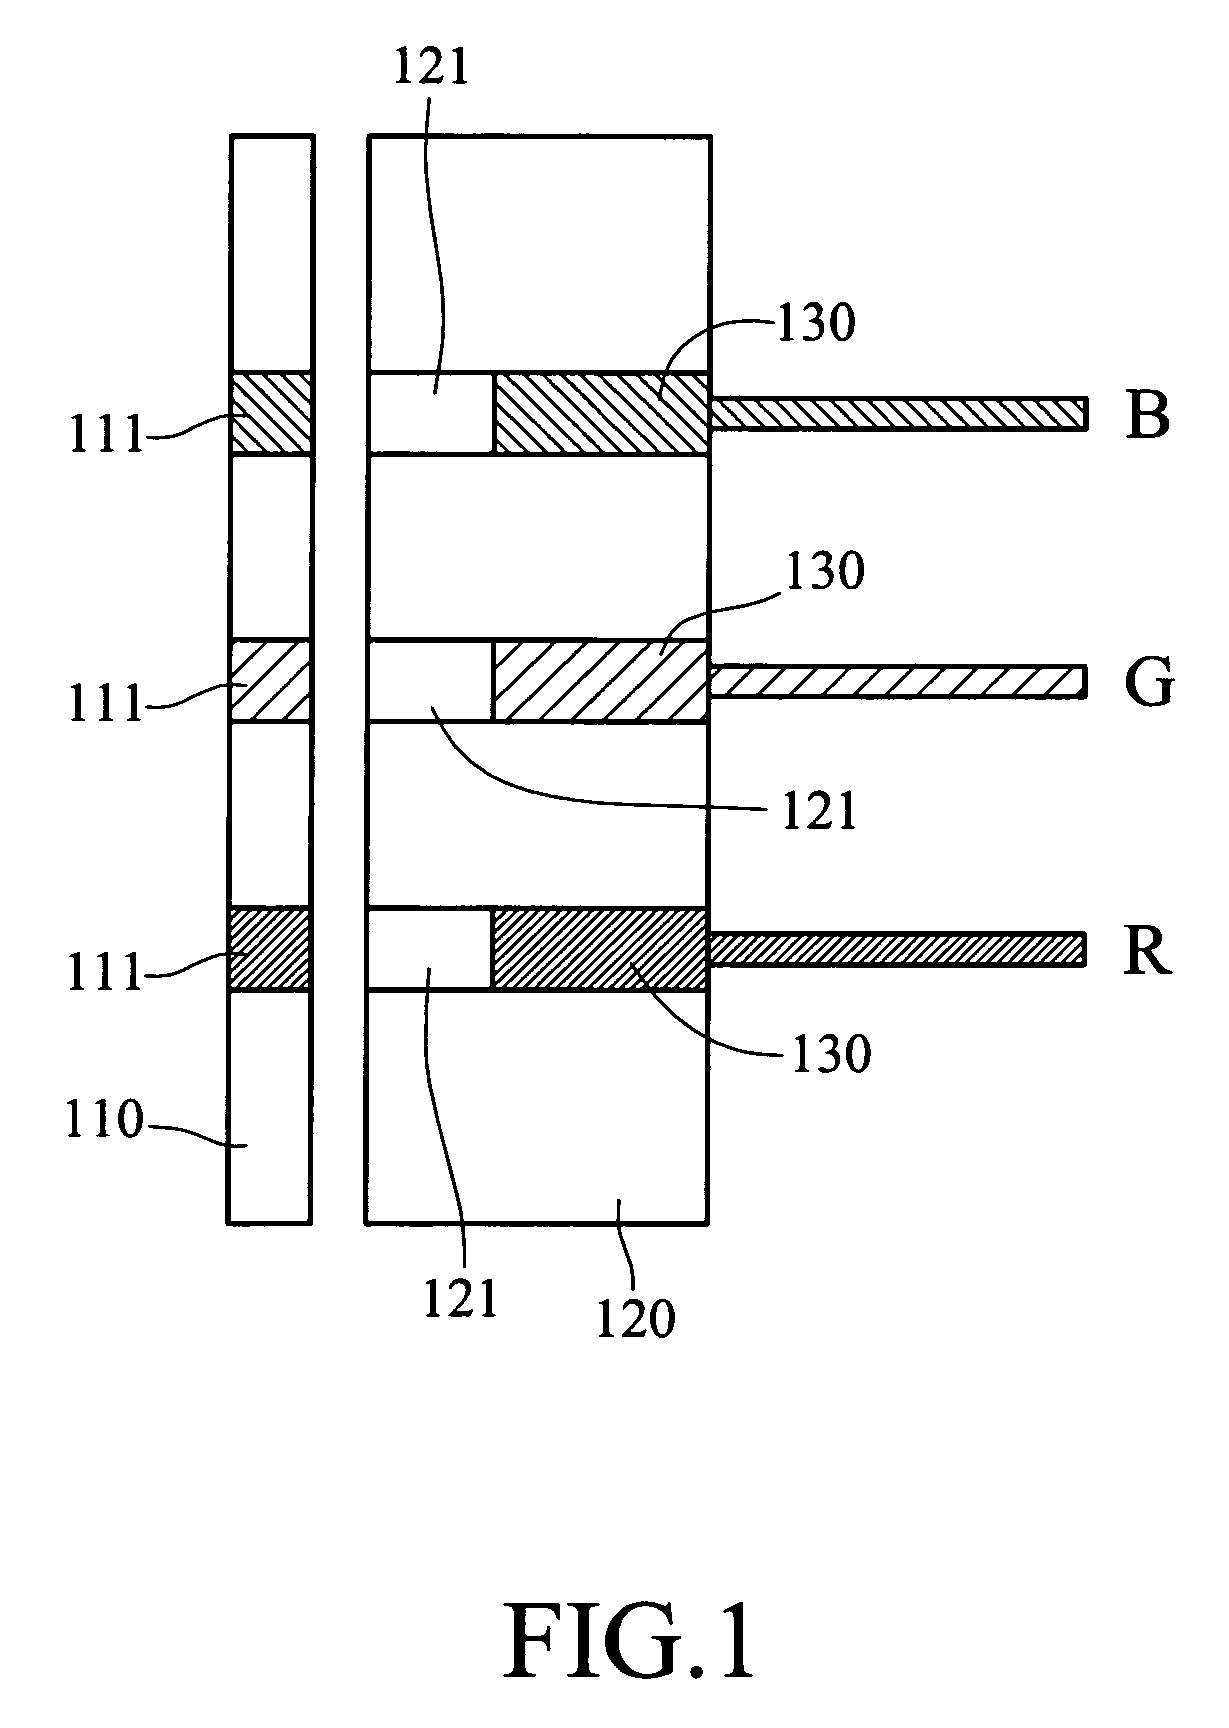 Micro crystal fiber lasers and method of making frequency-doubling crystal fibers